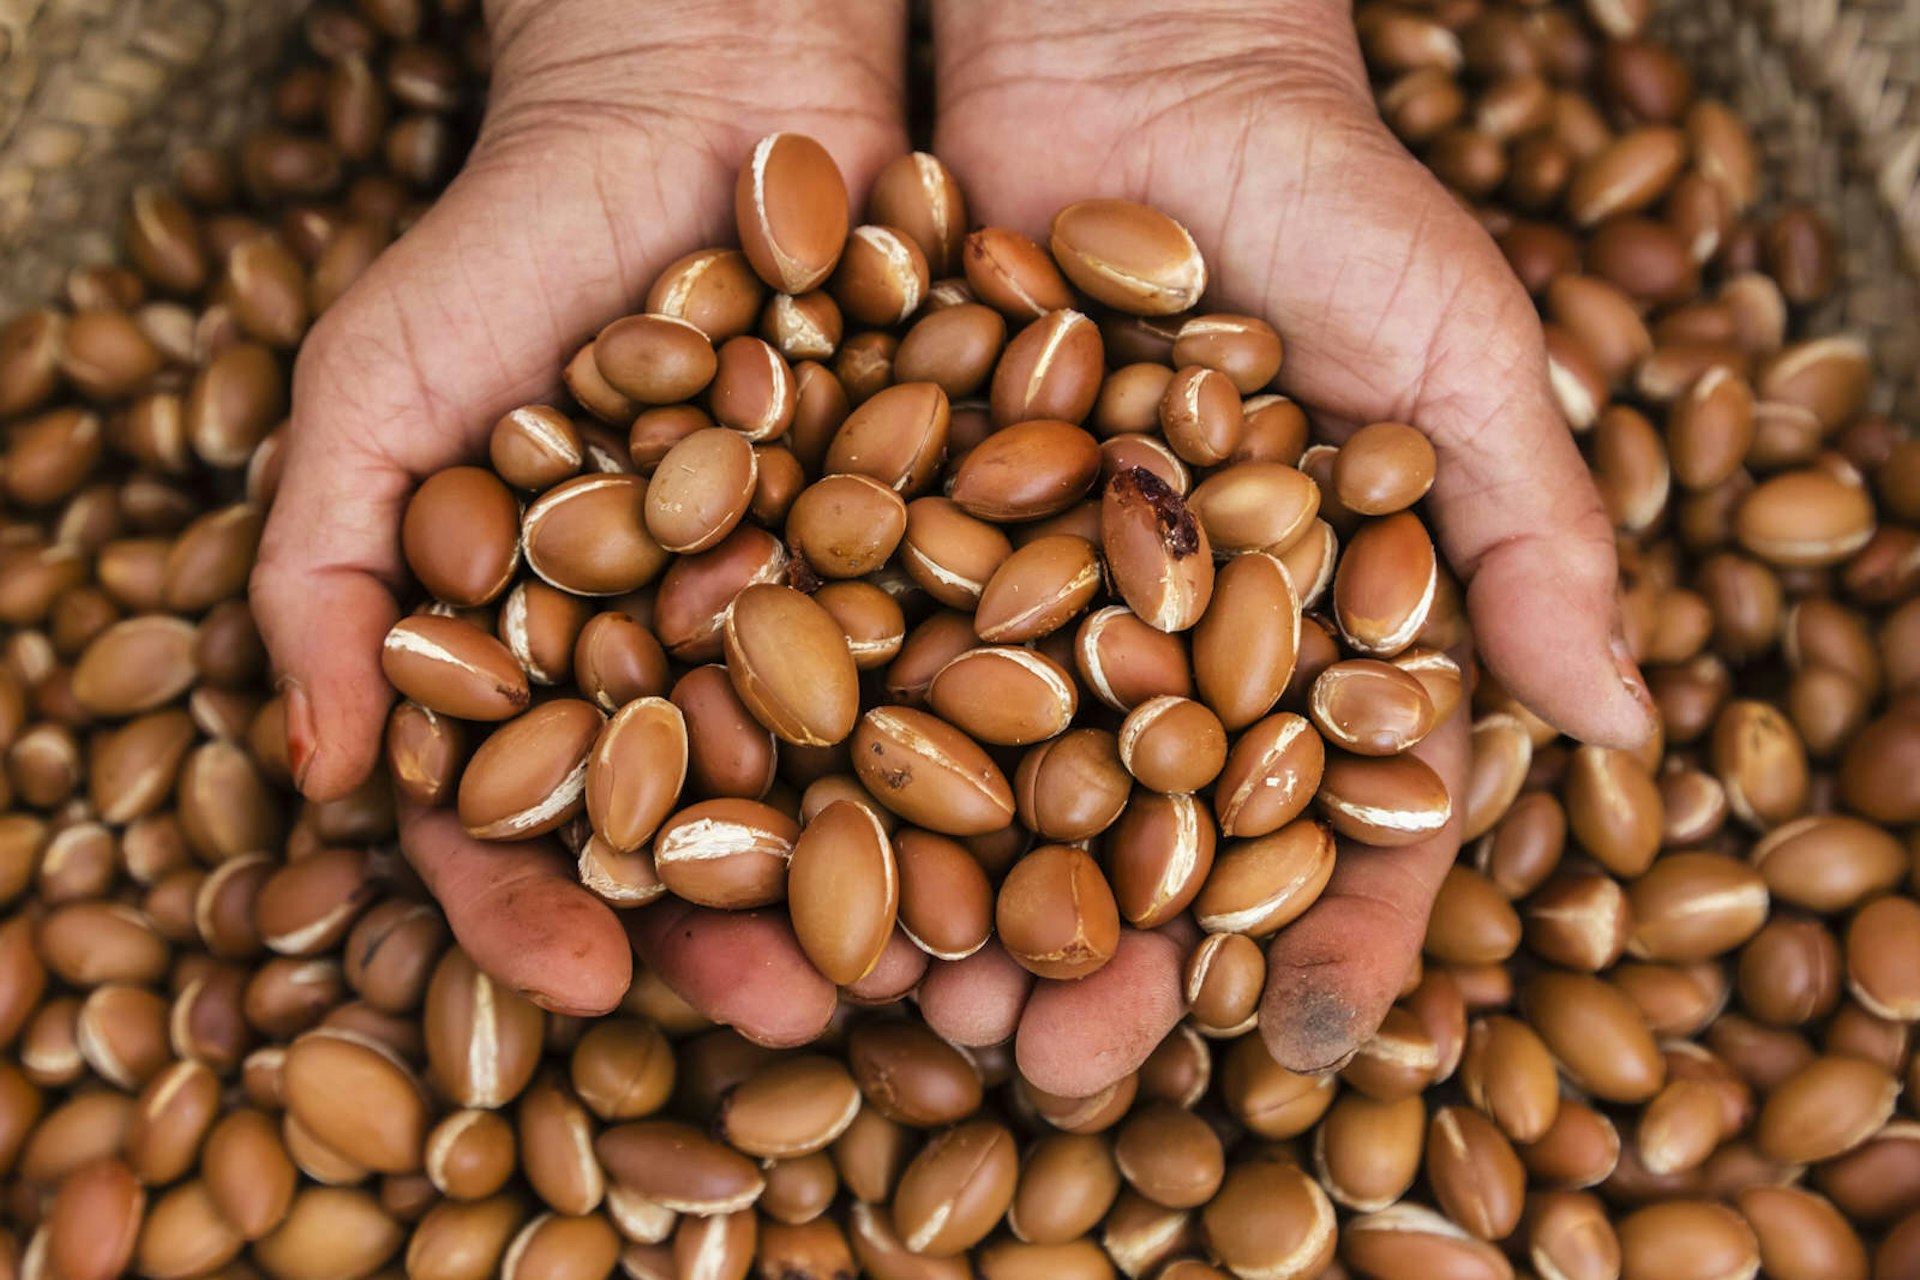 Close up of hands holding argan oil nuts. Image by Jeremy Woodhouse / Getty Images